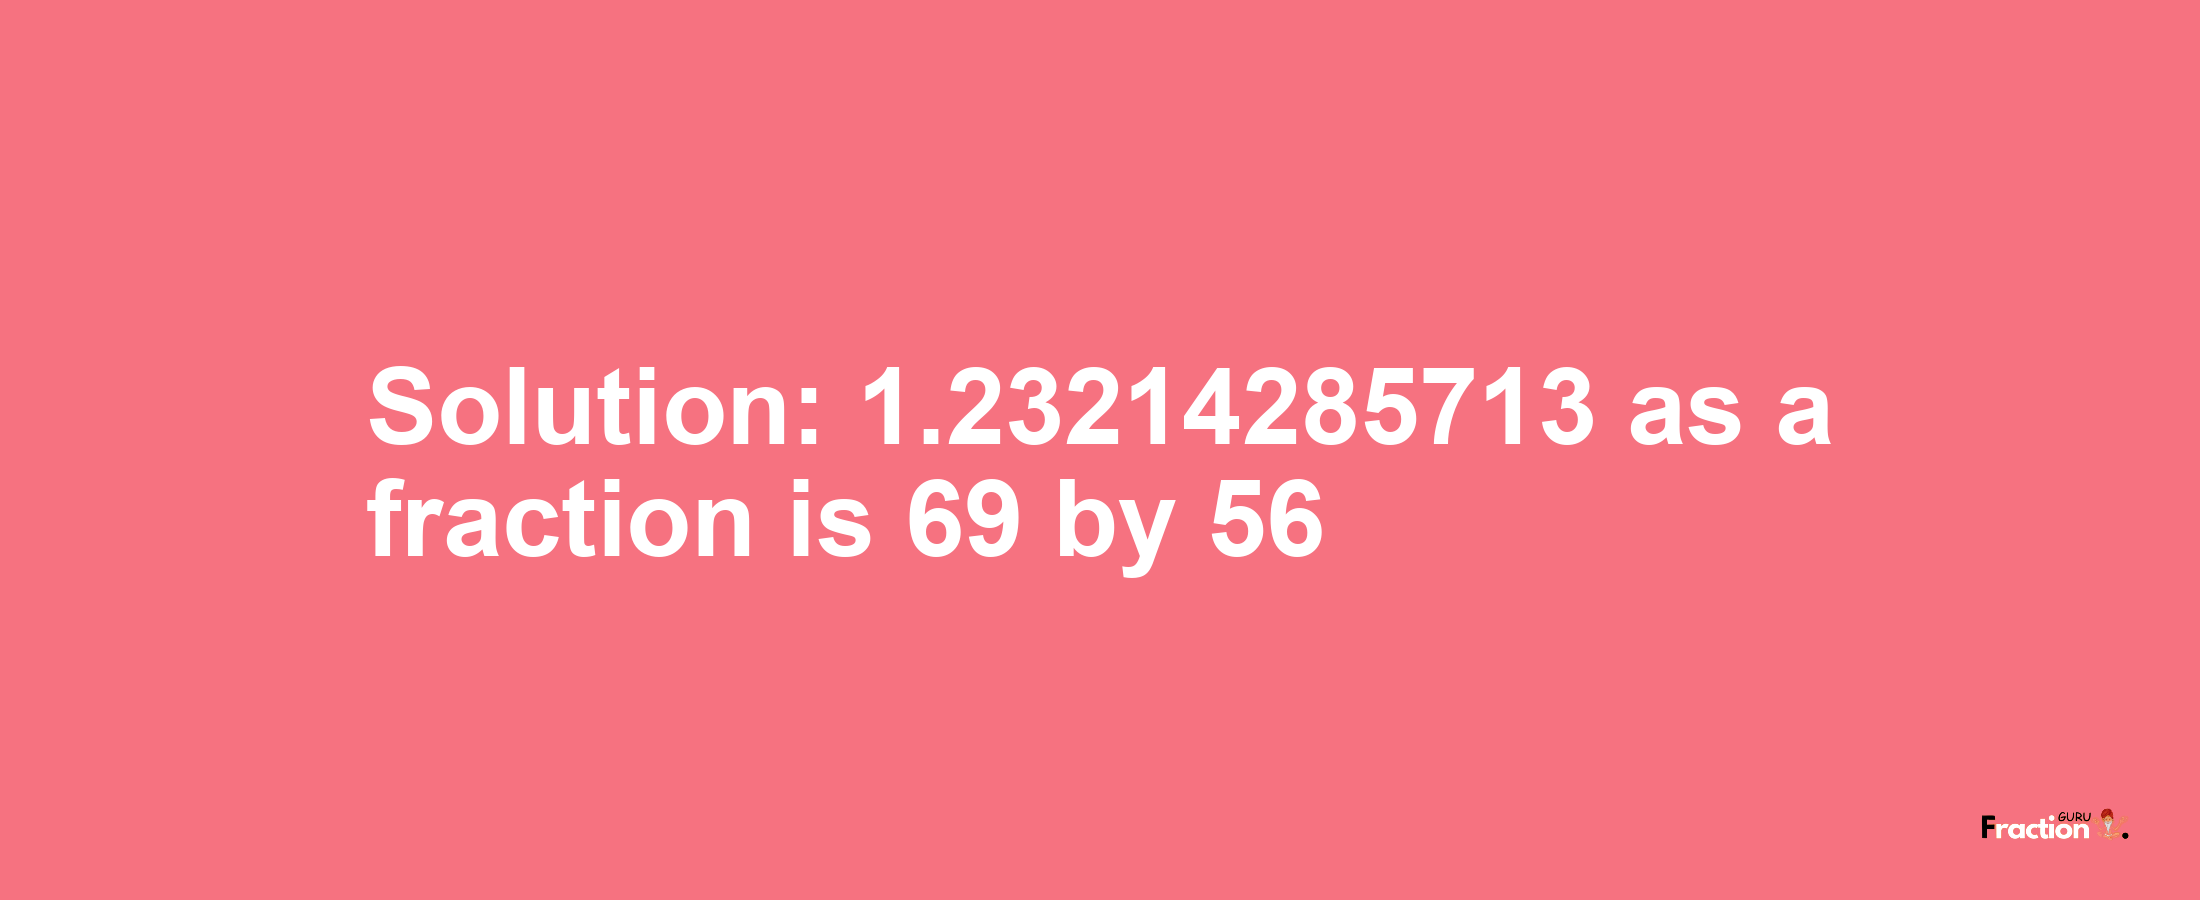 Solution:1.23214285713 as a fraction is 69/56